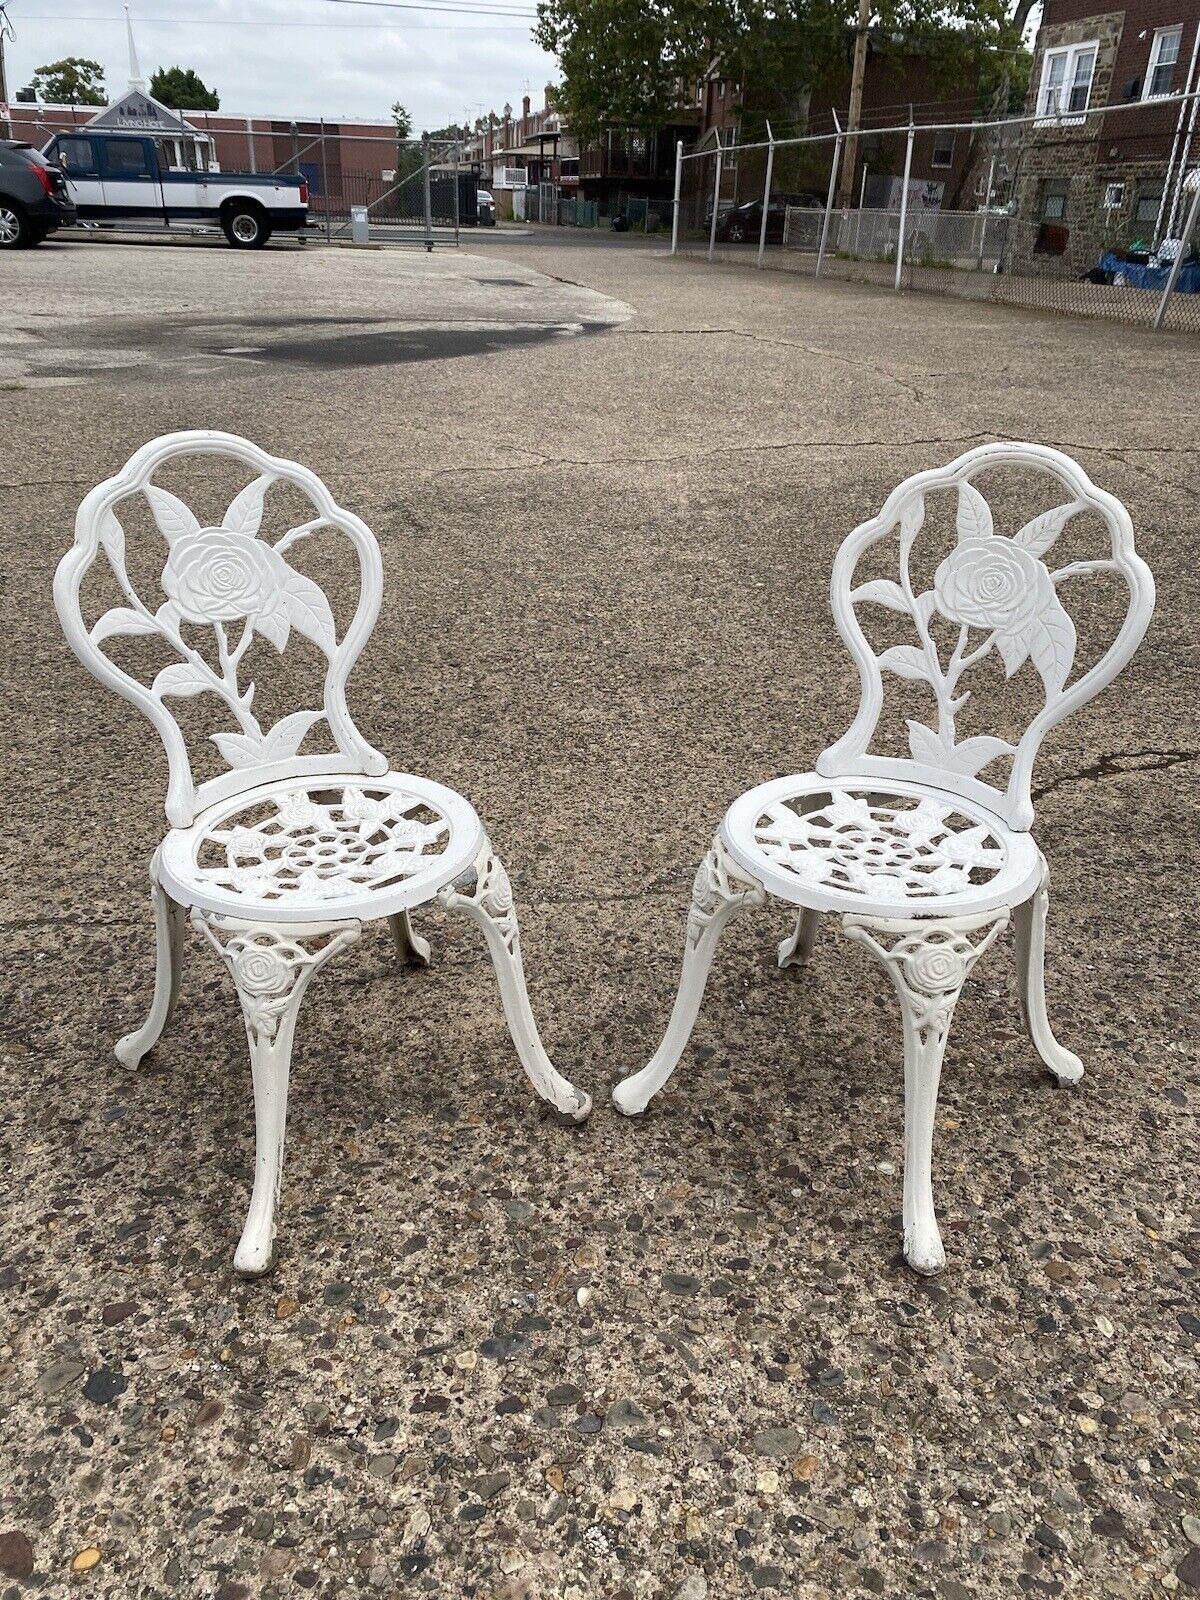 Victorian Style Rose Pattern Cast Aluminum Garden Patio Outdoor Bistro Chairs - a Pair. Circa 21st Century. Pre-owned. Measurements: 33.5